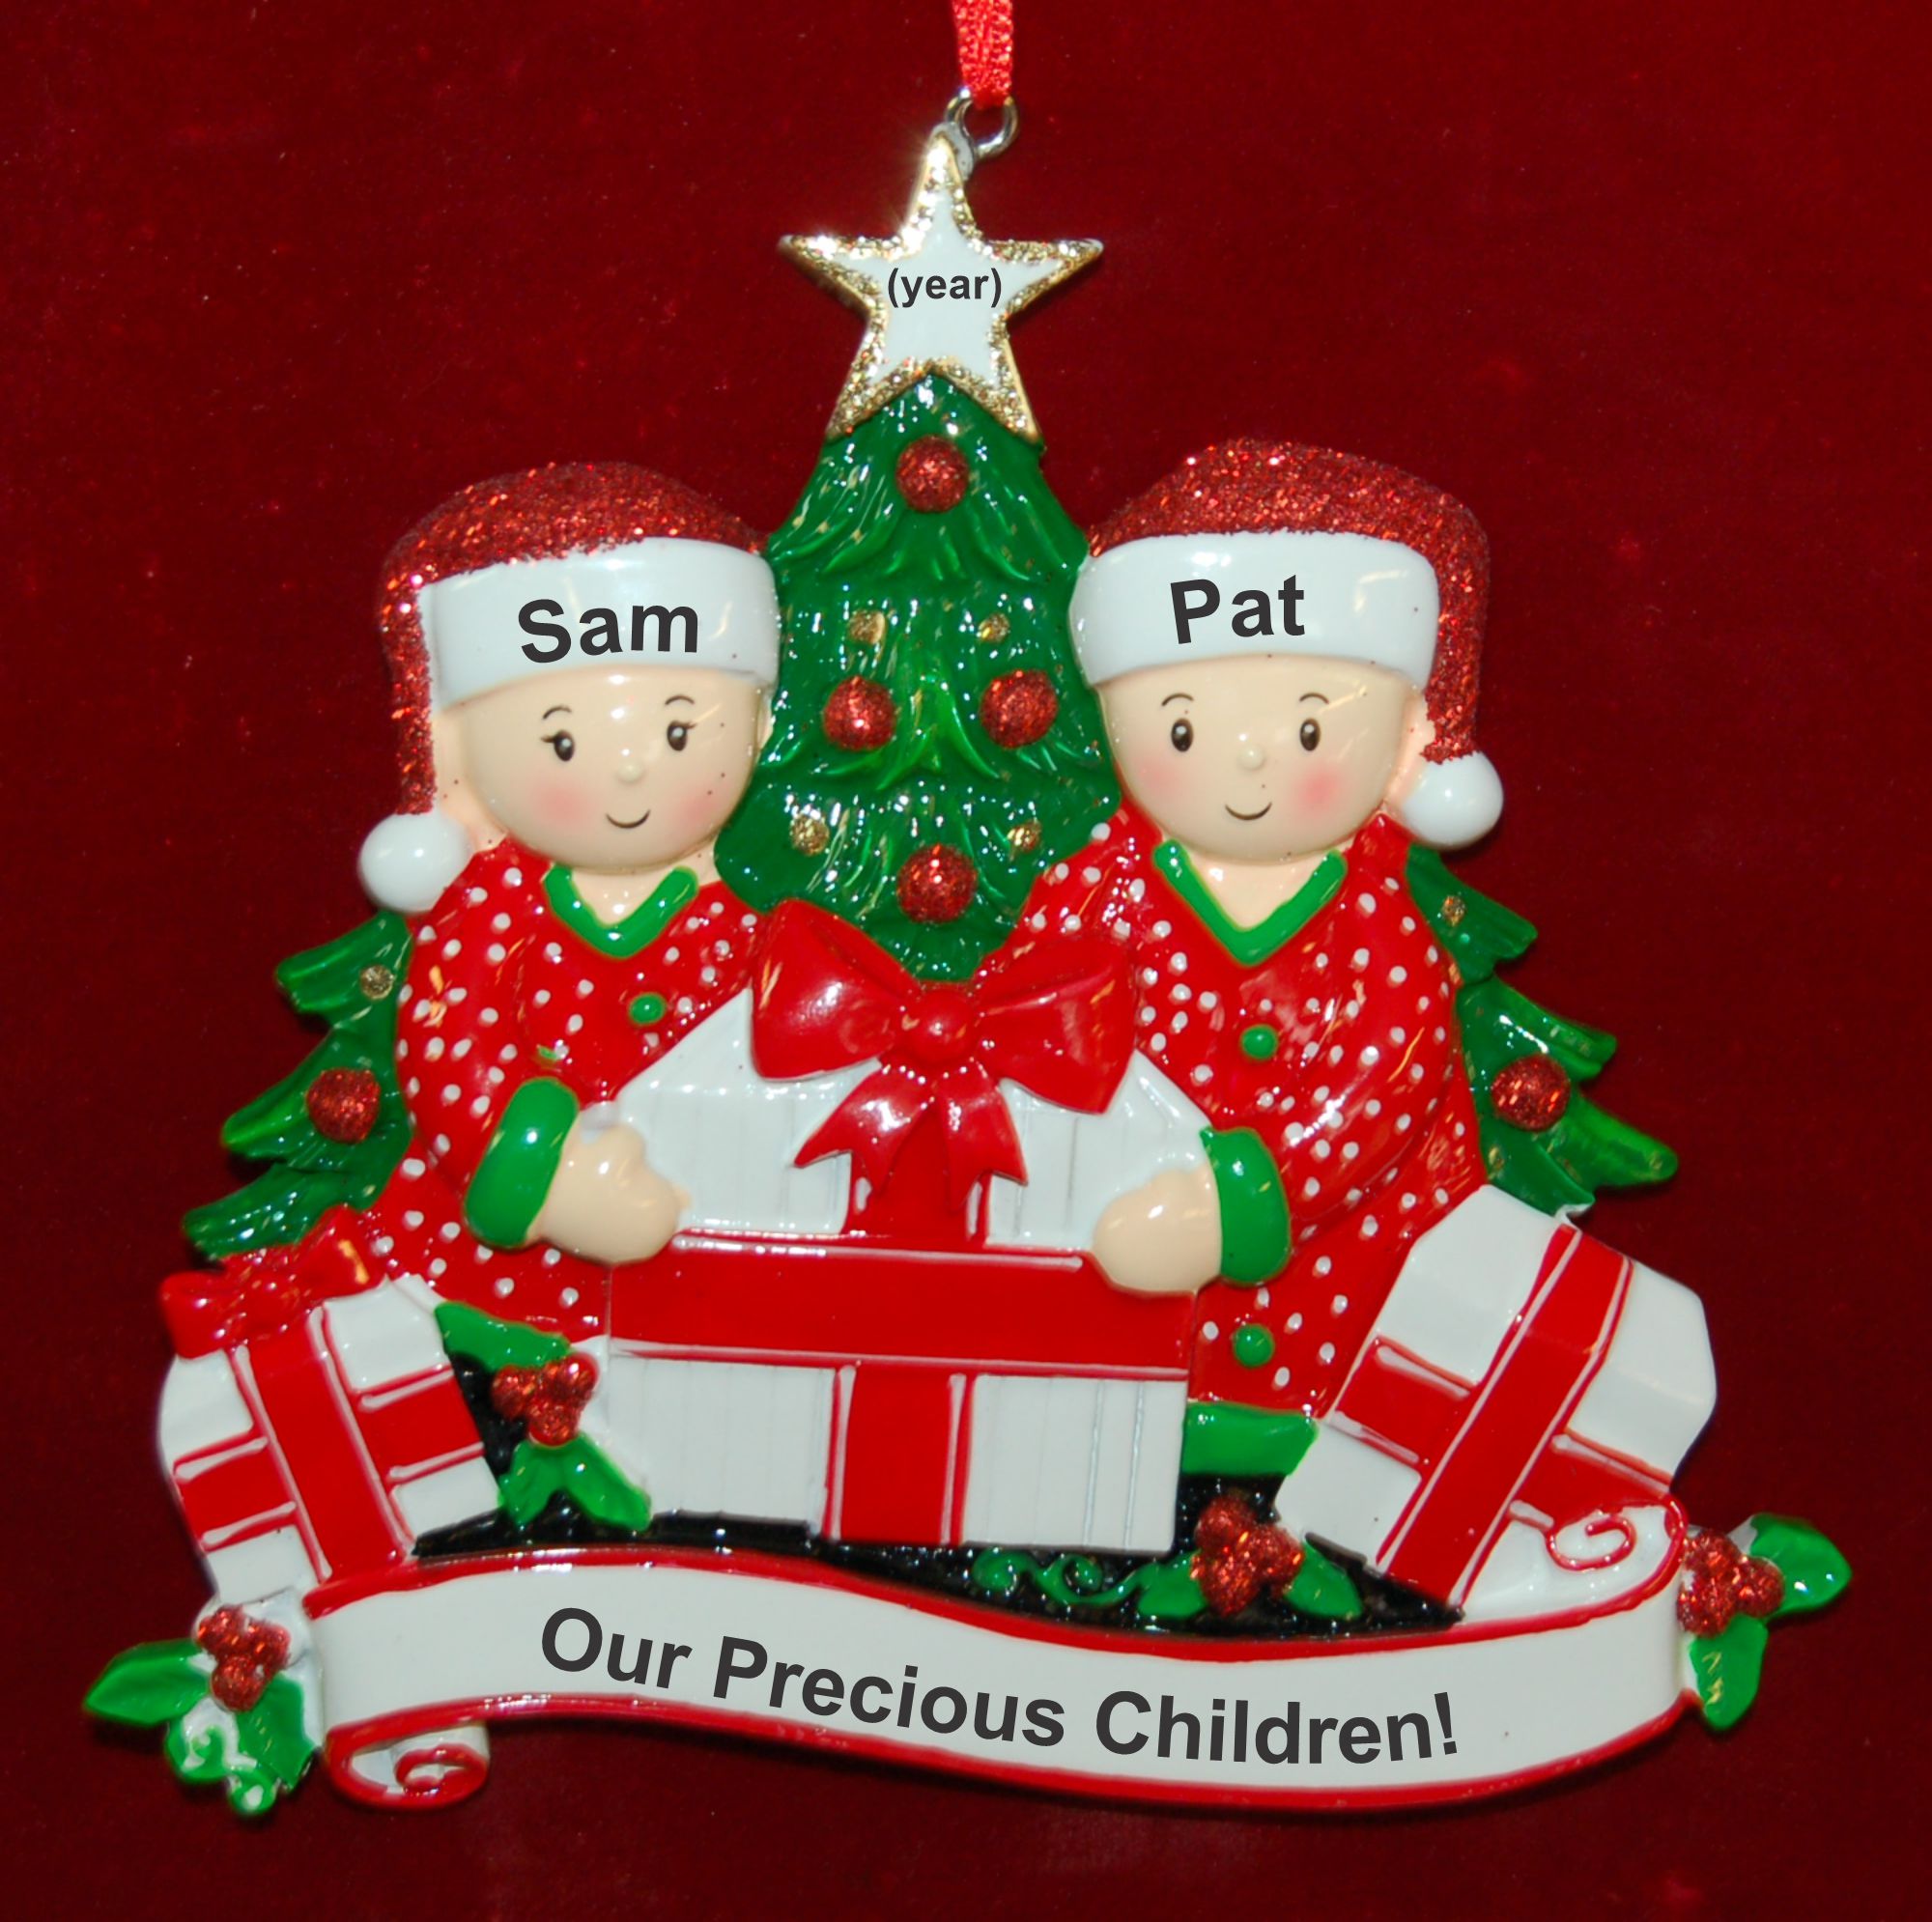 Our 2 Precious Kids Christmas Ornament Gifts Under the Tree Personalized by RussellRhodes.com